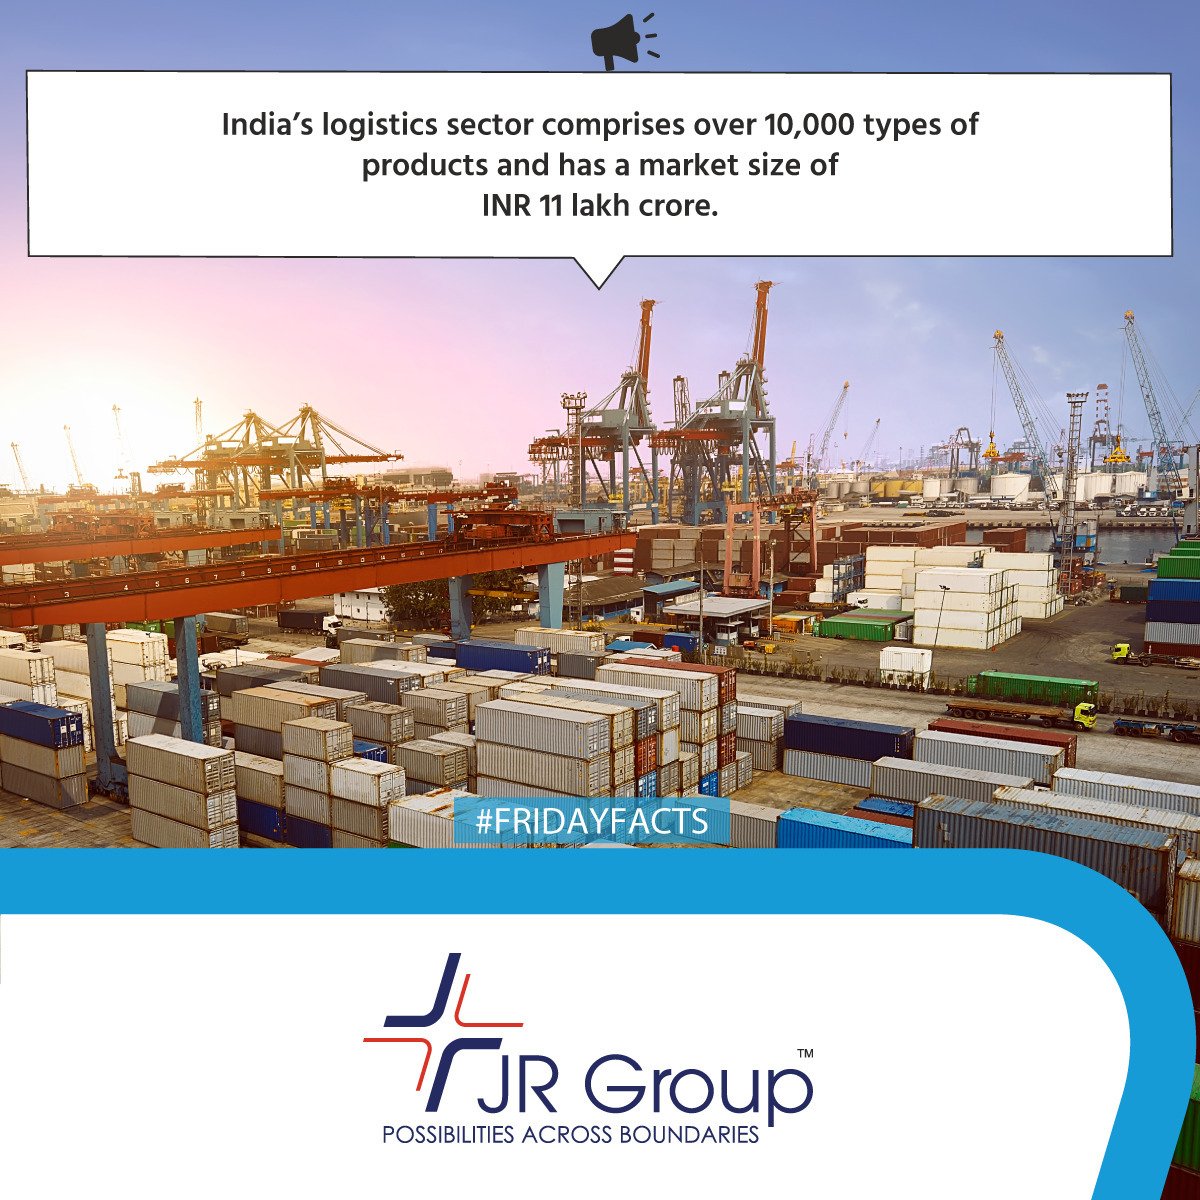 That's a crazy number!

#Possibilitiesacrossboundaries #JRgroup #Possible #India #FridayFacts #Facts #Shipping #Logistics #Roadlines #Transport